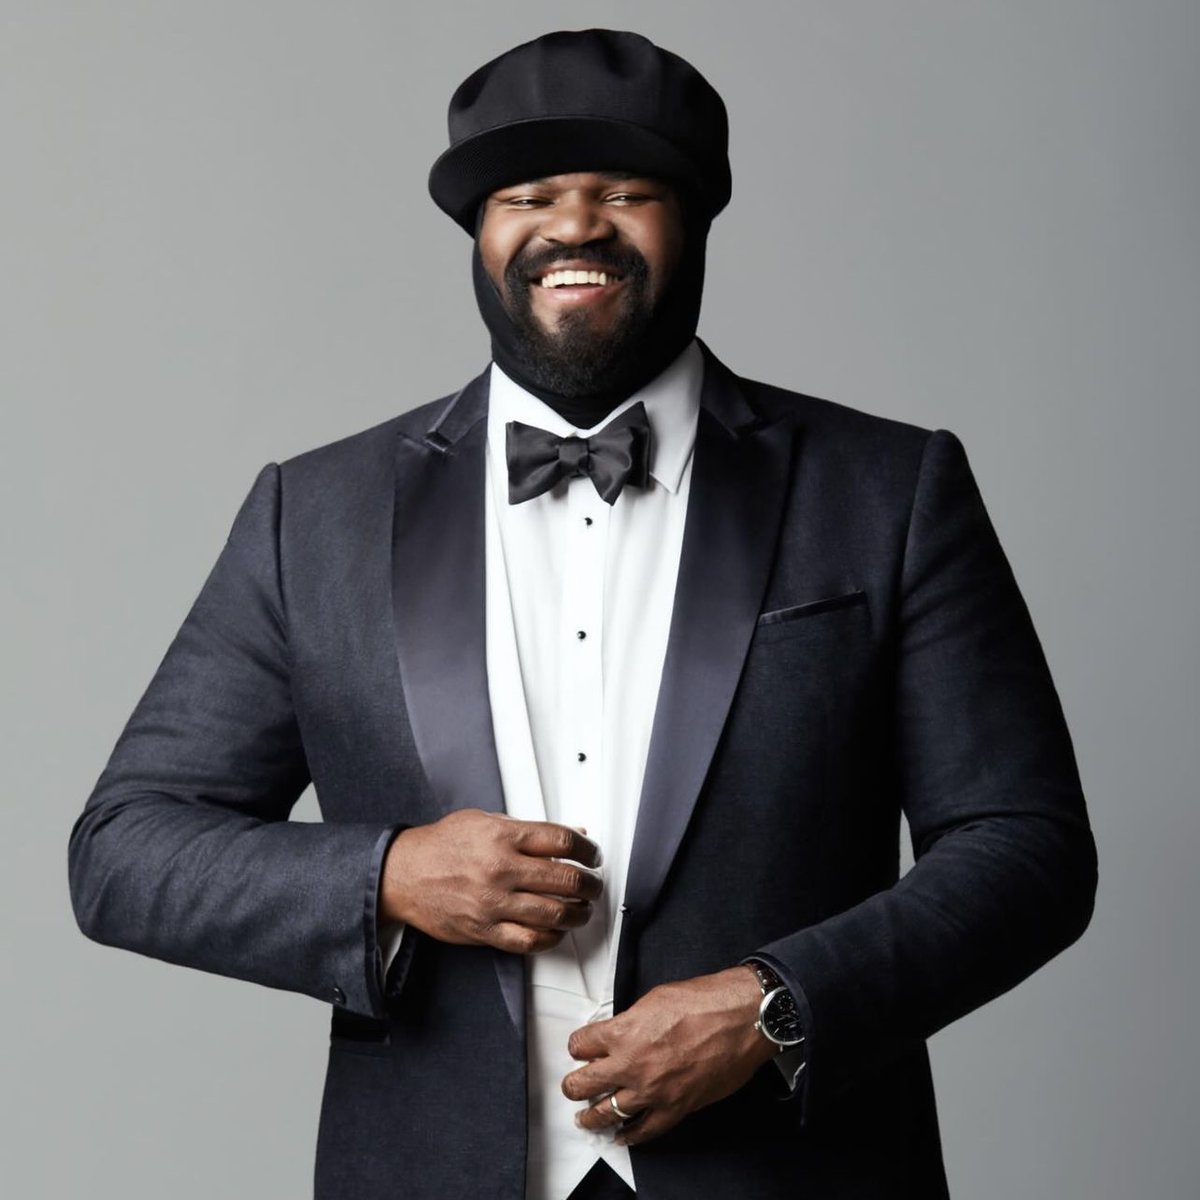 It's been so good to be back on the road! Lots of new show announcements will be coming soon. Make sure you check back here or my website tour page to see when I'll be performing near you. gregoryporter.com/tour/ Better yet - set post notifications...